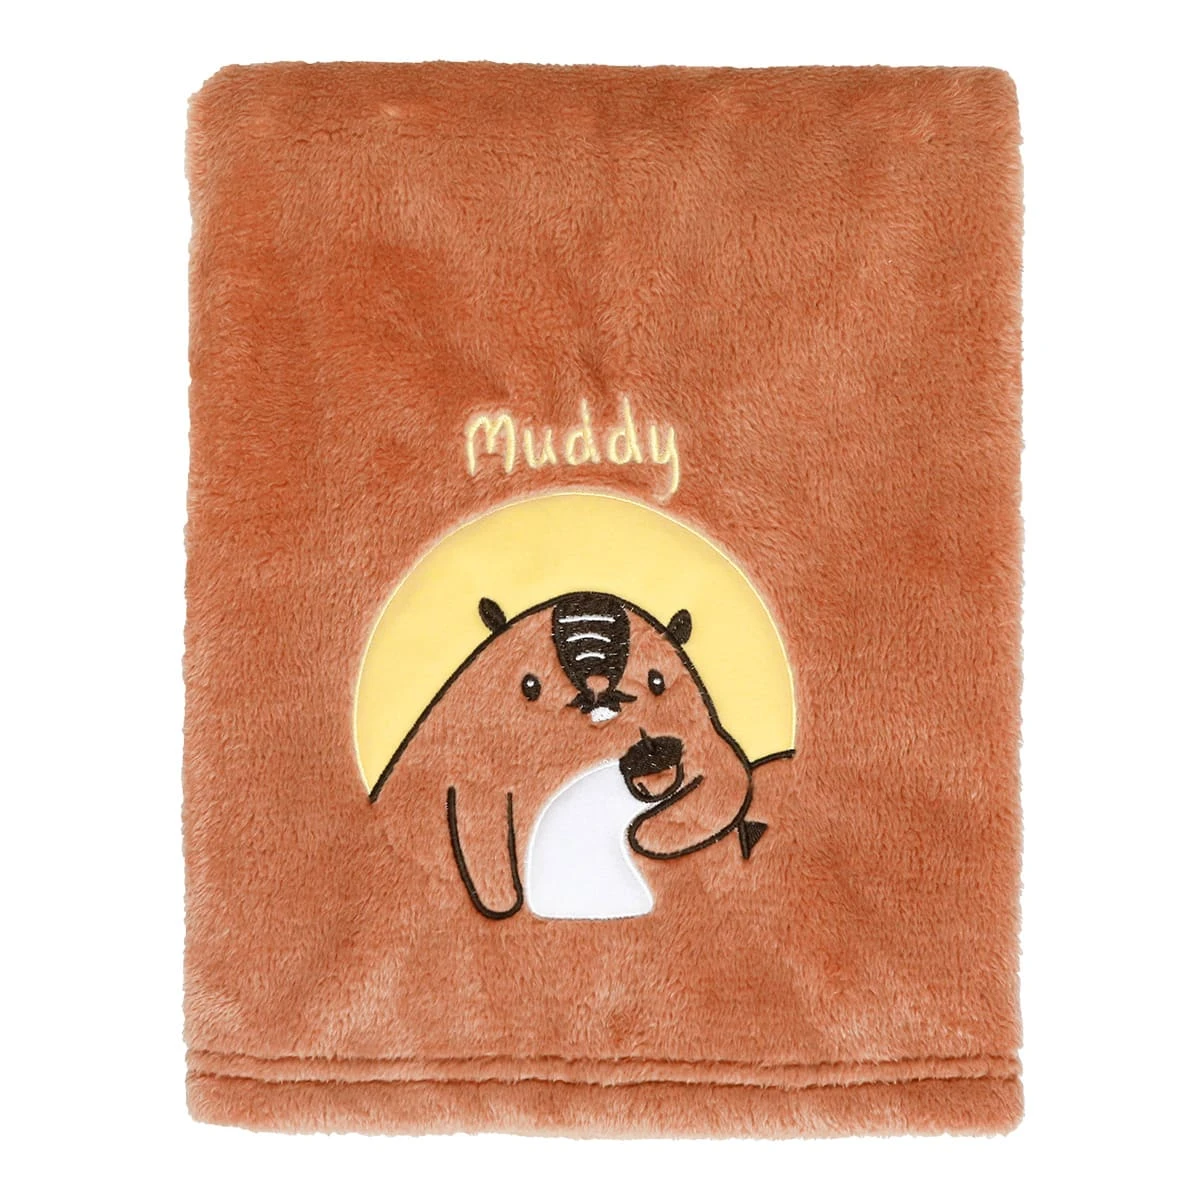 Muddy Embroidery Plush Baby Blanket (Brown)